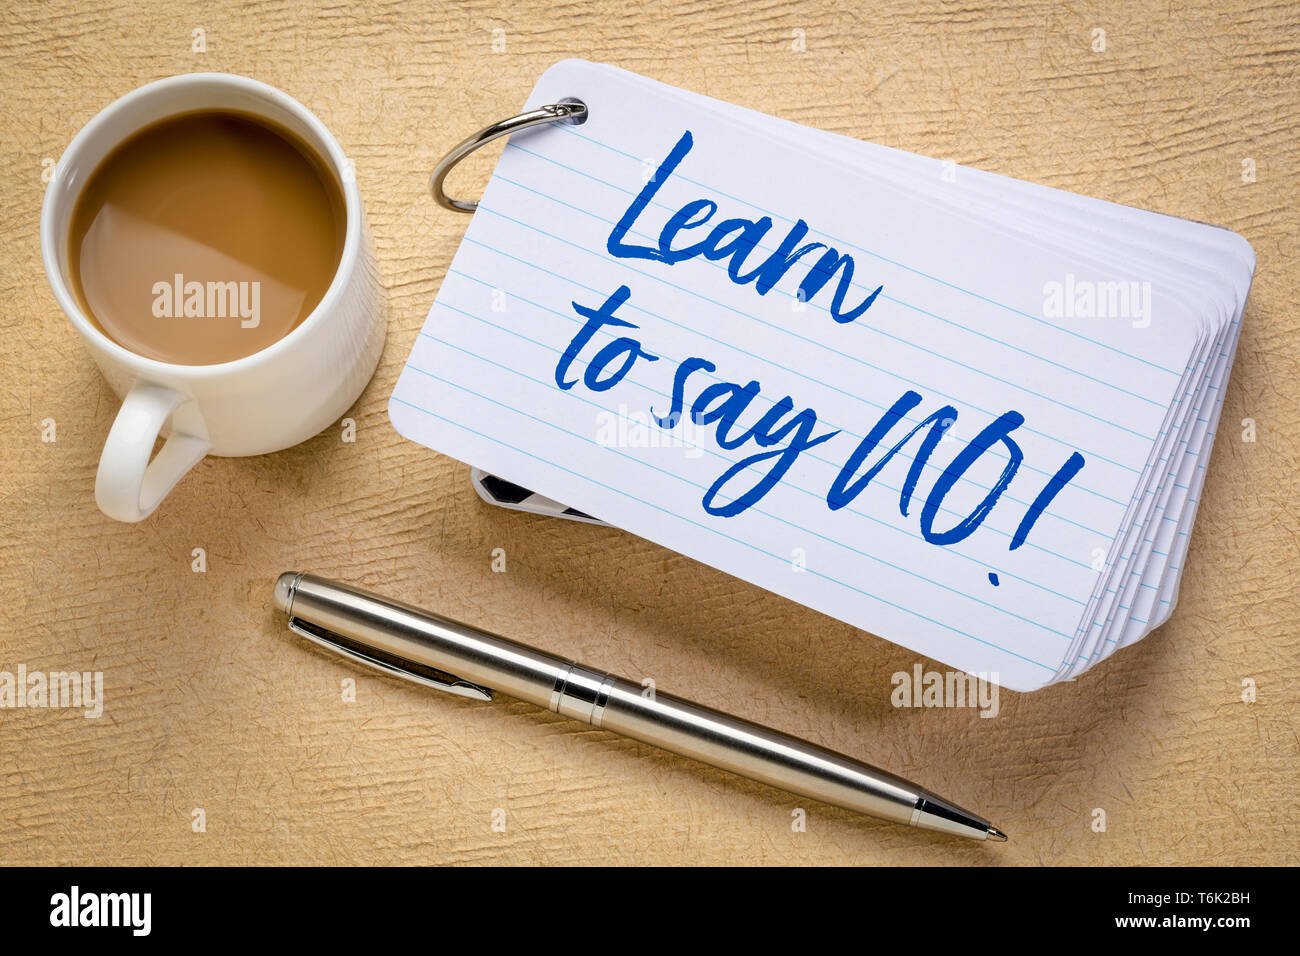 Learn to say no  advice or reminder- handwriting on a stack of index cards with a cup of coffee and a pen against textured bark paper Stock Photo